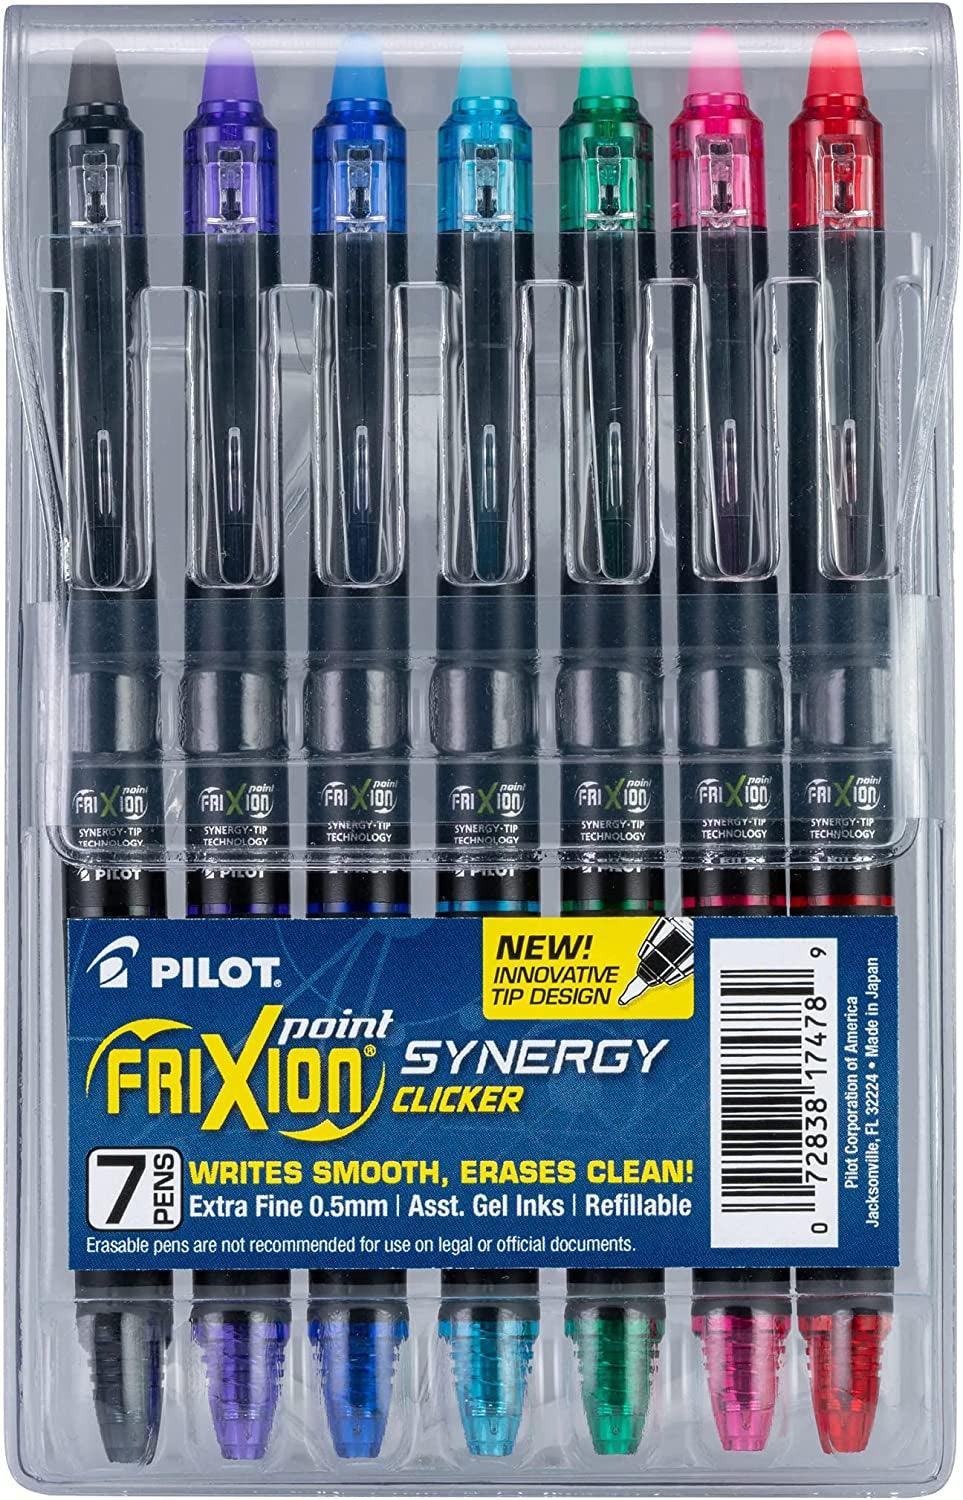 , Frixion Synergy Clicker Erasable, Refillable, Retractable Gel Ink Pens, Extra Fine Point 0.5 Mm, Pack of 3, Black, Blue & Red